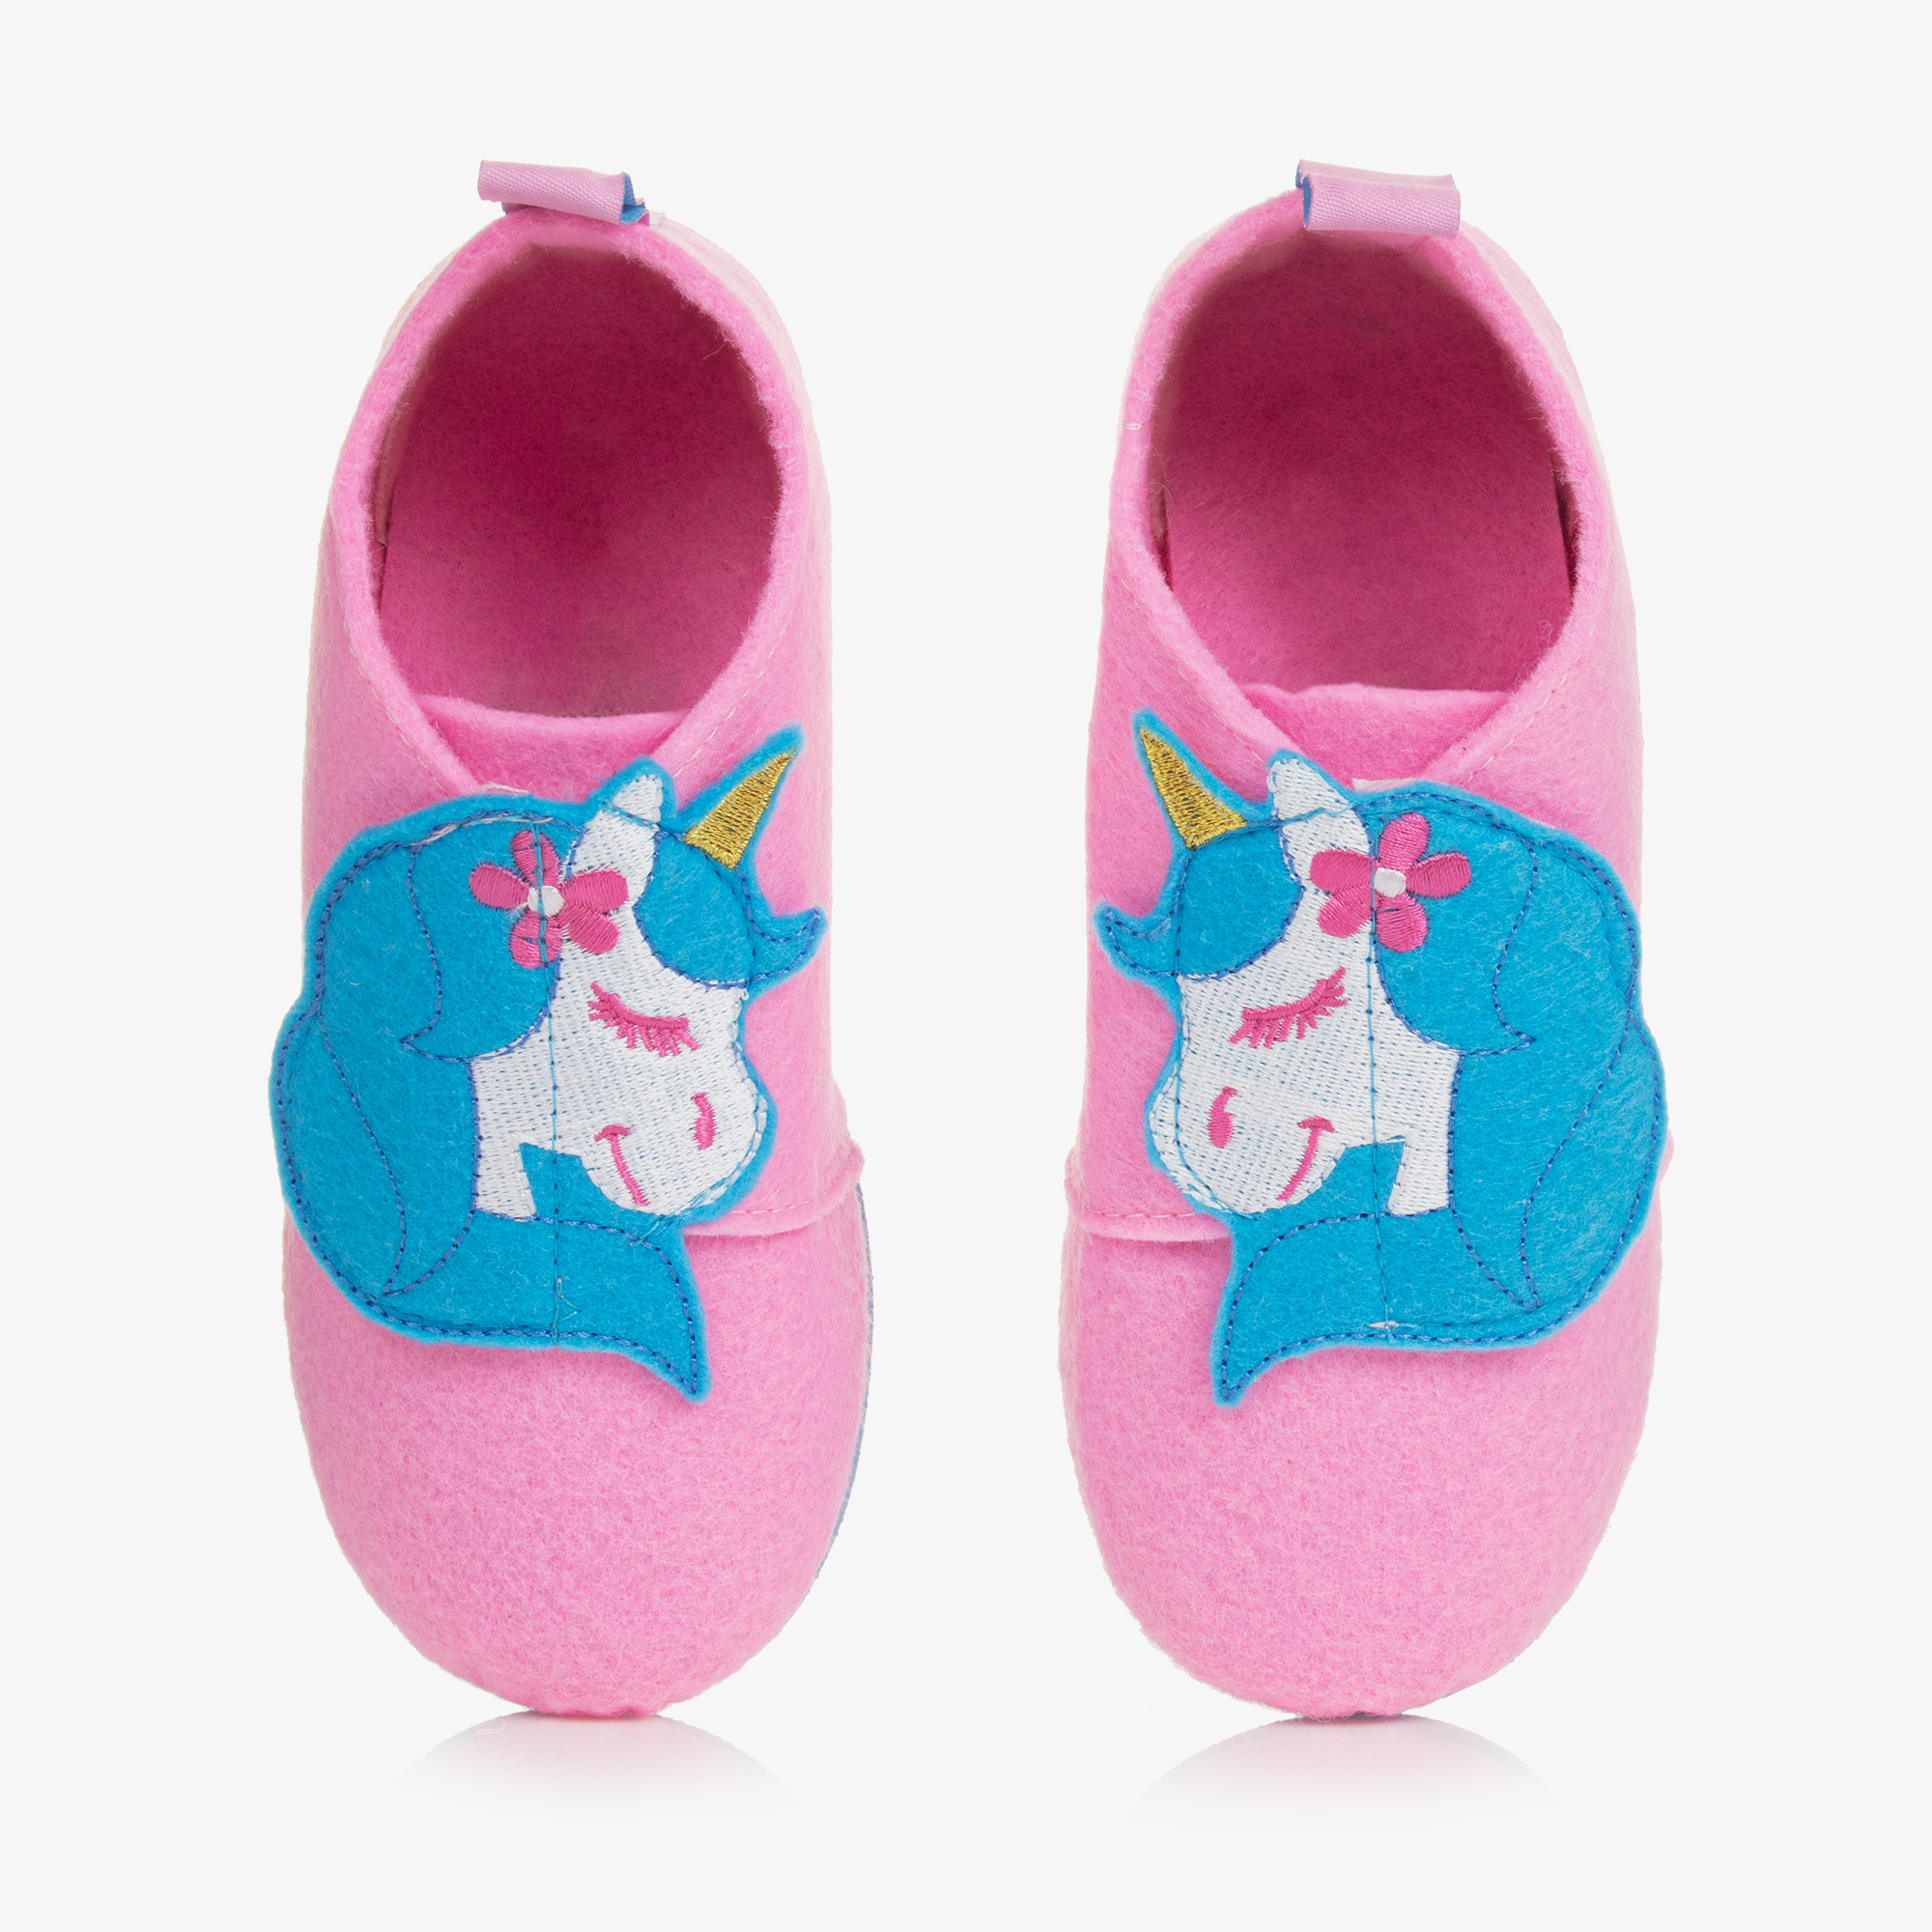 Ztl Colorful Unicorn Slippers Indoor House Slippers India | Ubuy-sgquangbinhtourist.com.vn